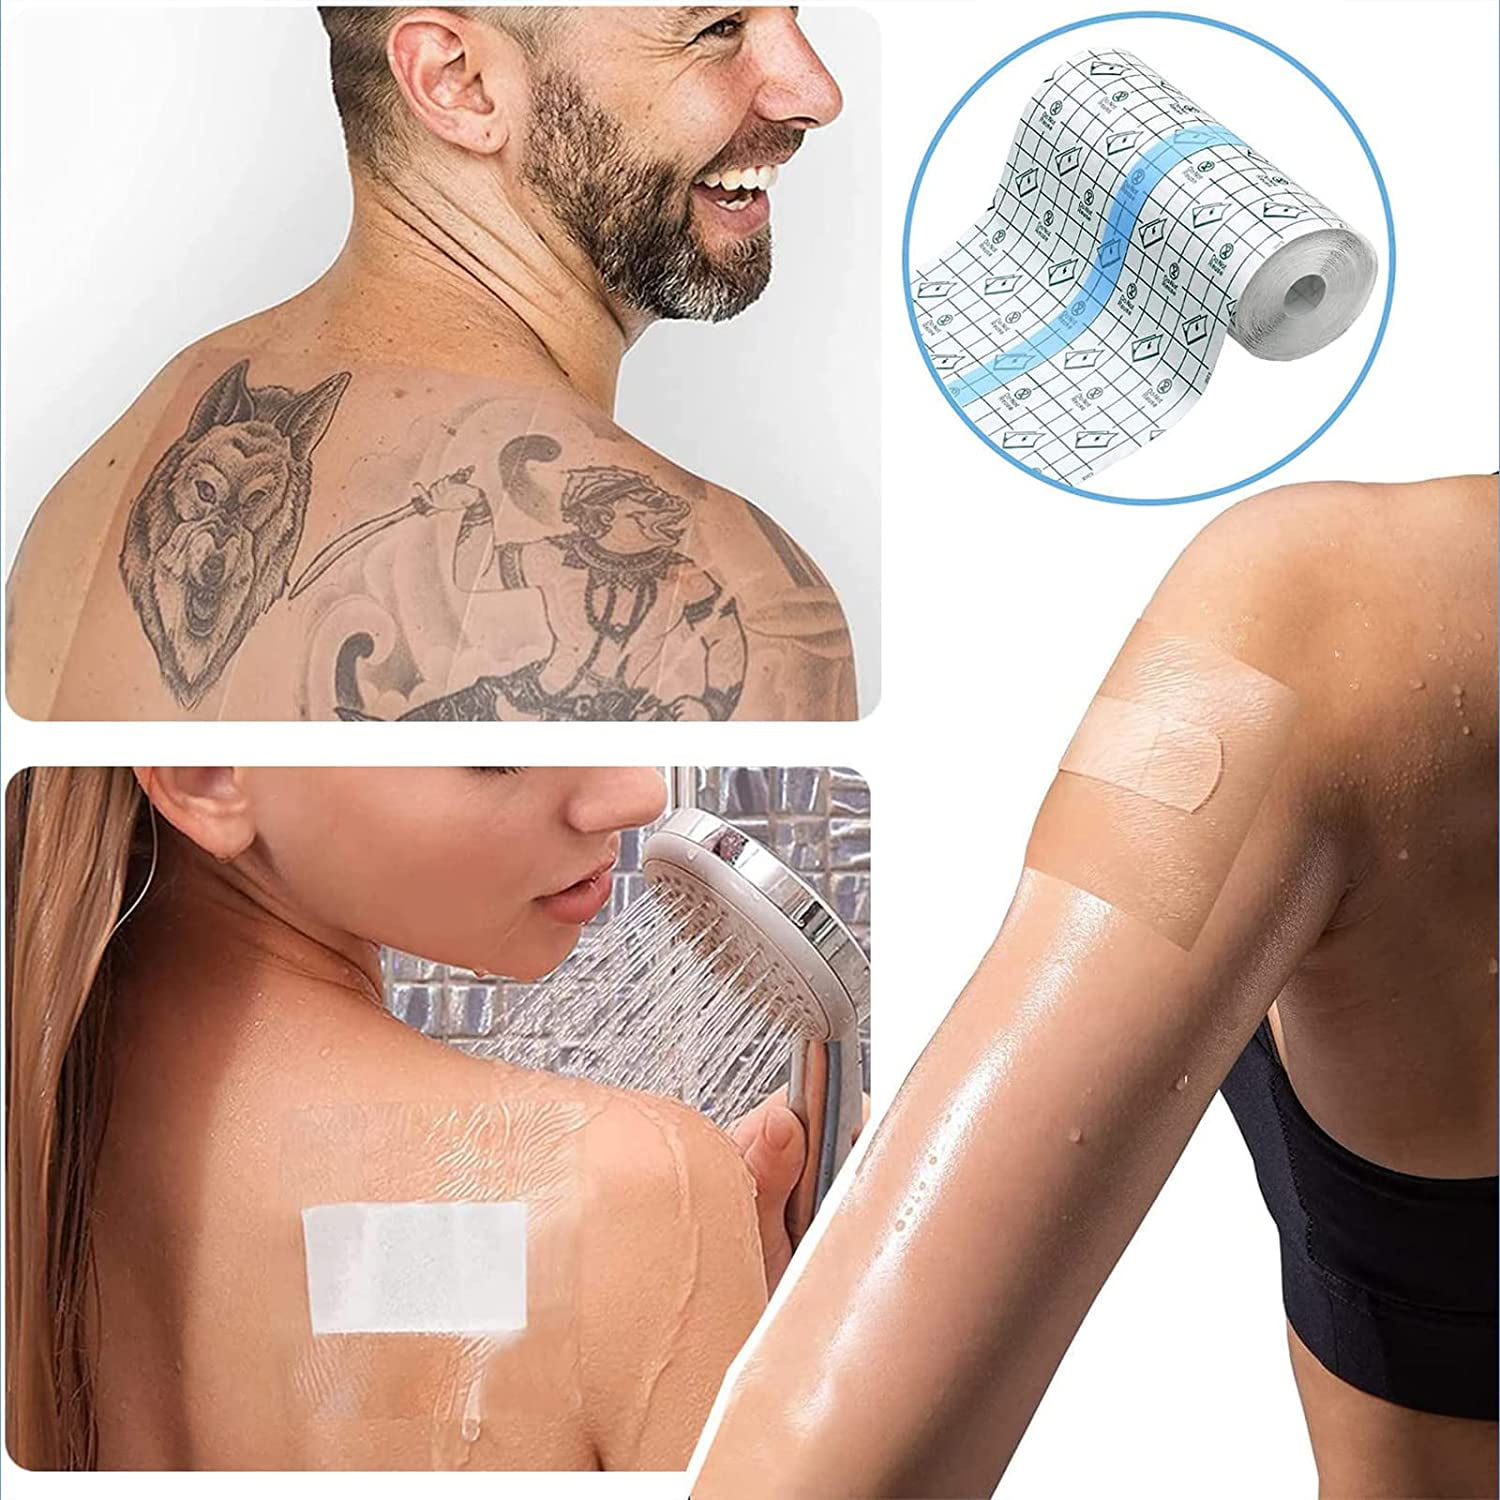 Tattoo Aftercare Waterproof Bandage 15cm x 2m,Second Skin tattoos Cover bandages for Swimming,Protective Clear Adhesive Bandages for Tattoo Aftercare,Recovery,Plastic Cover,Protective Shield - Walmart.com